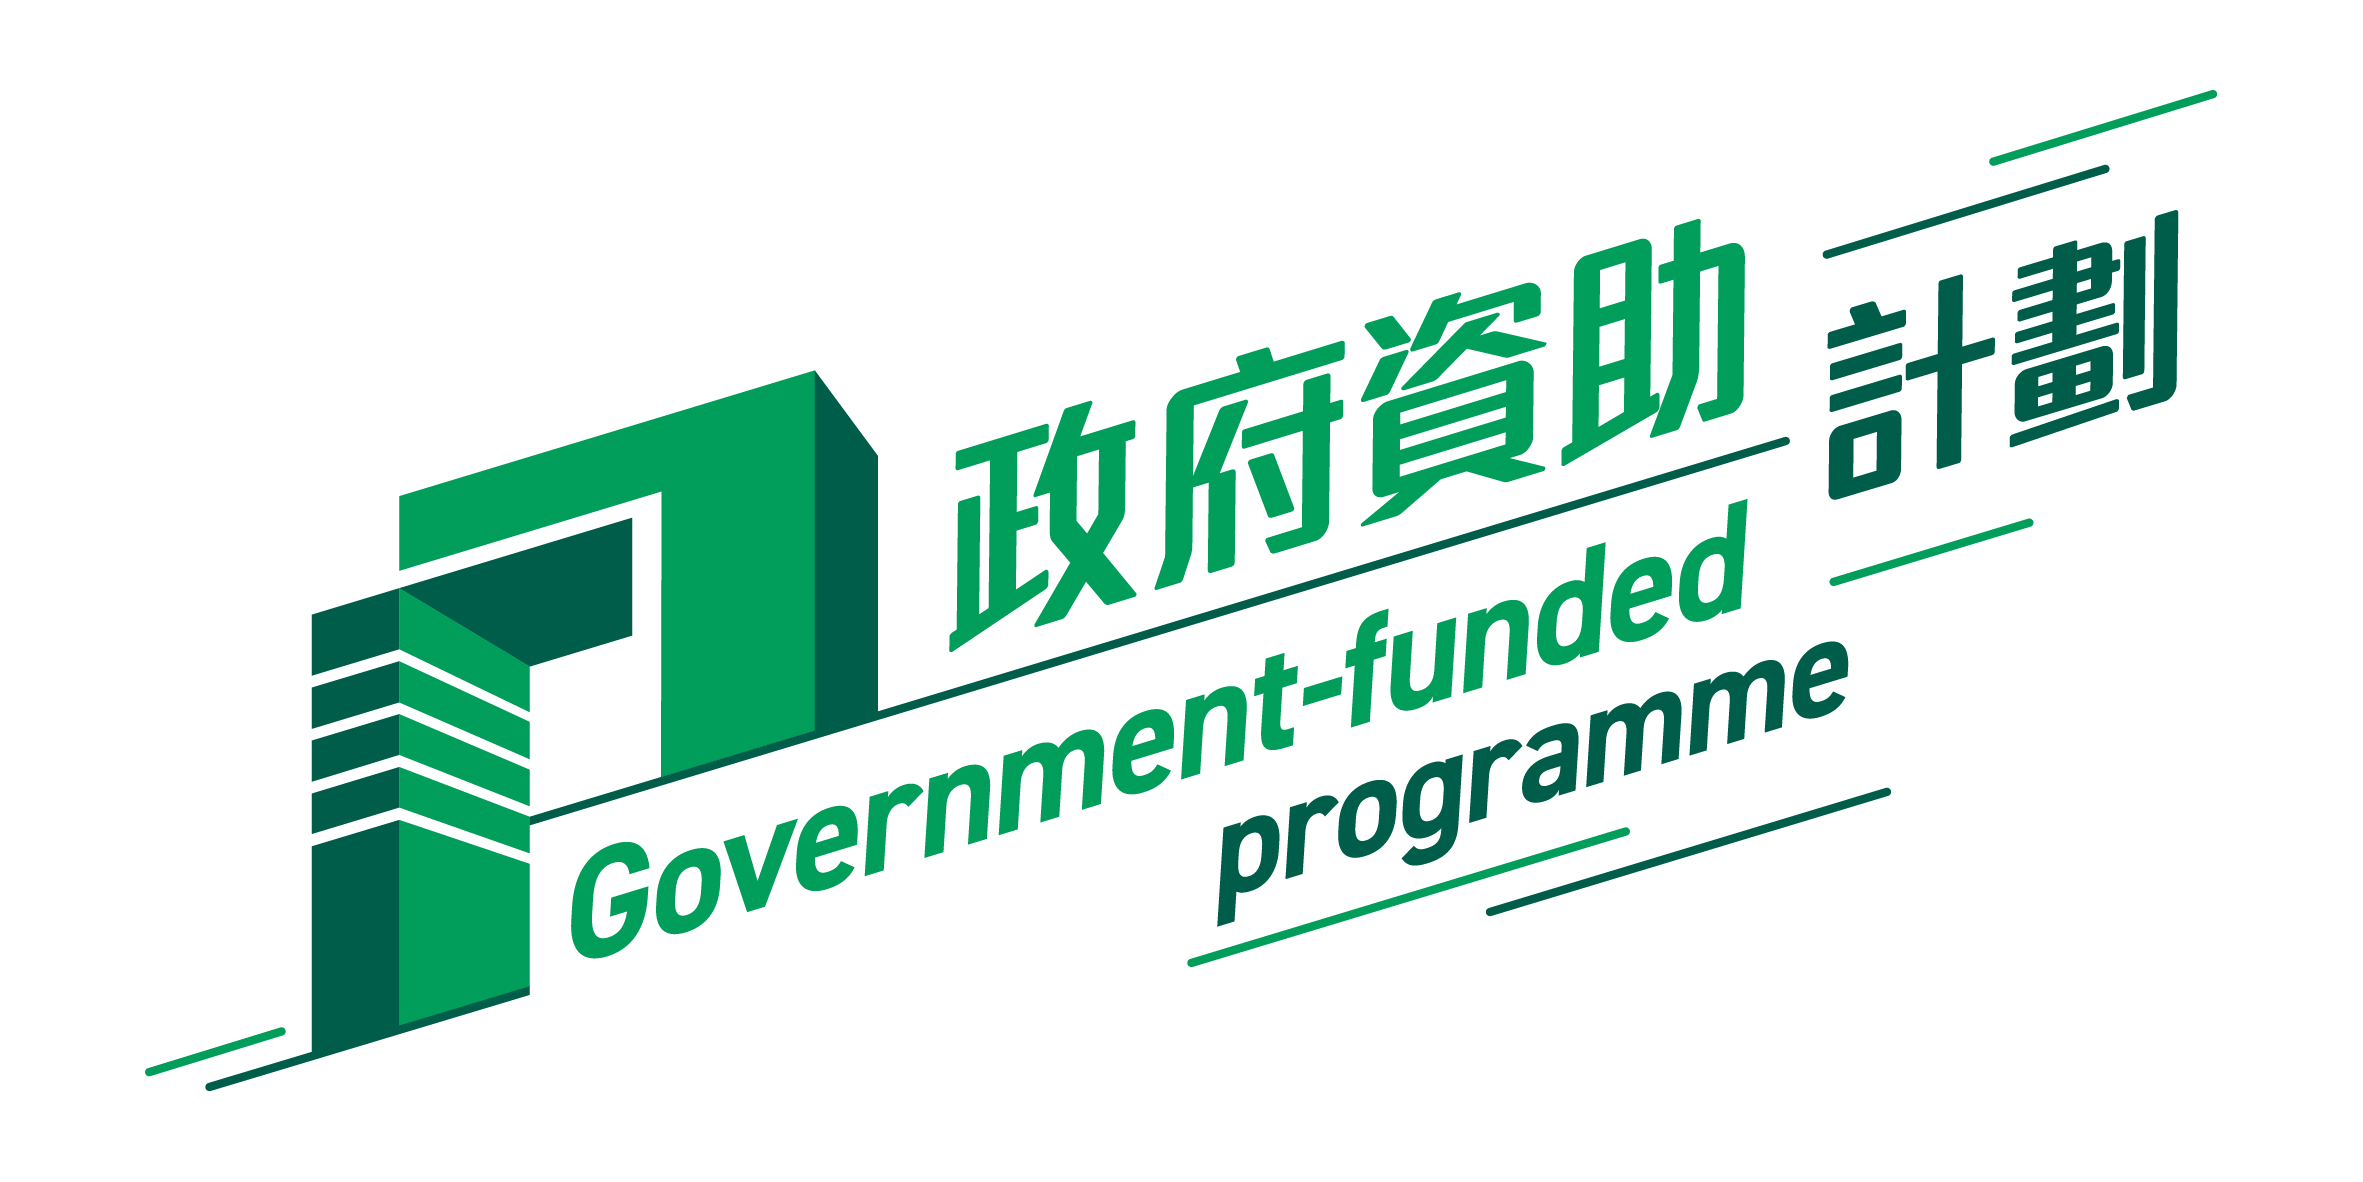 Government-funded programme logo